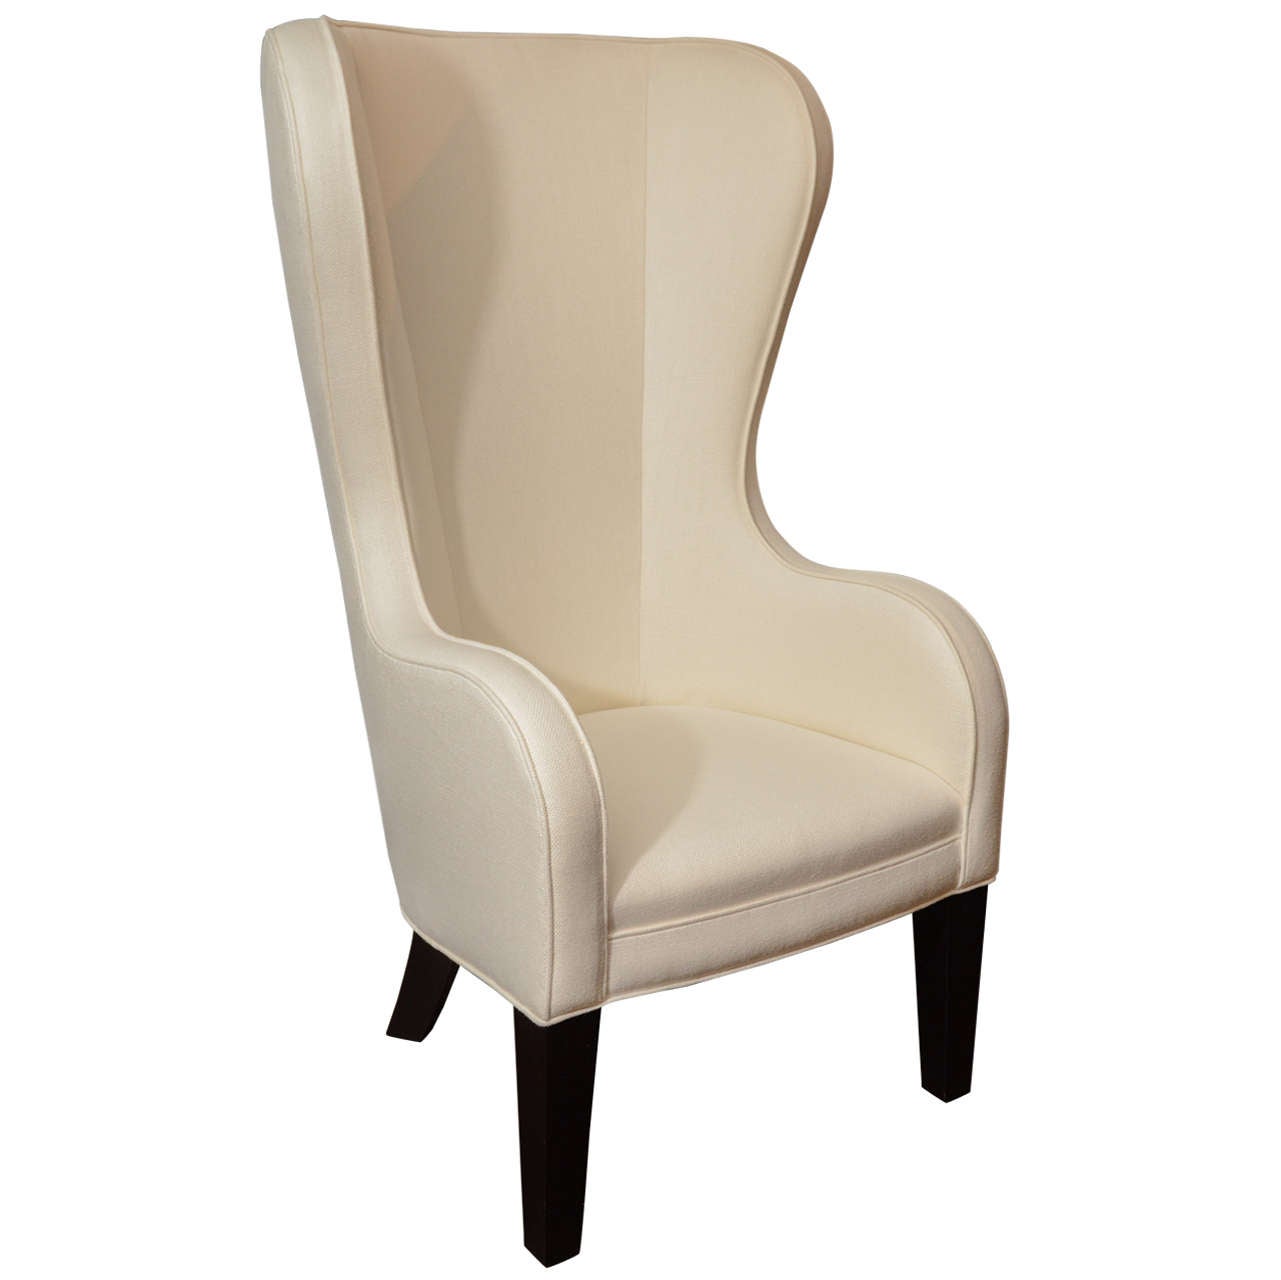 Jenelle Wingback Chair For Sale